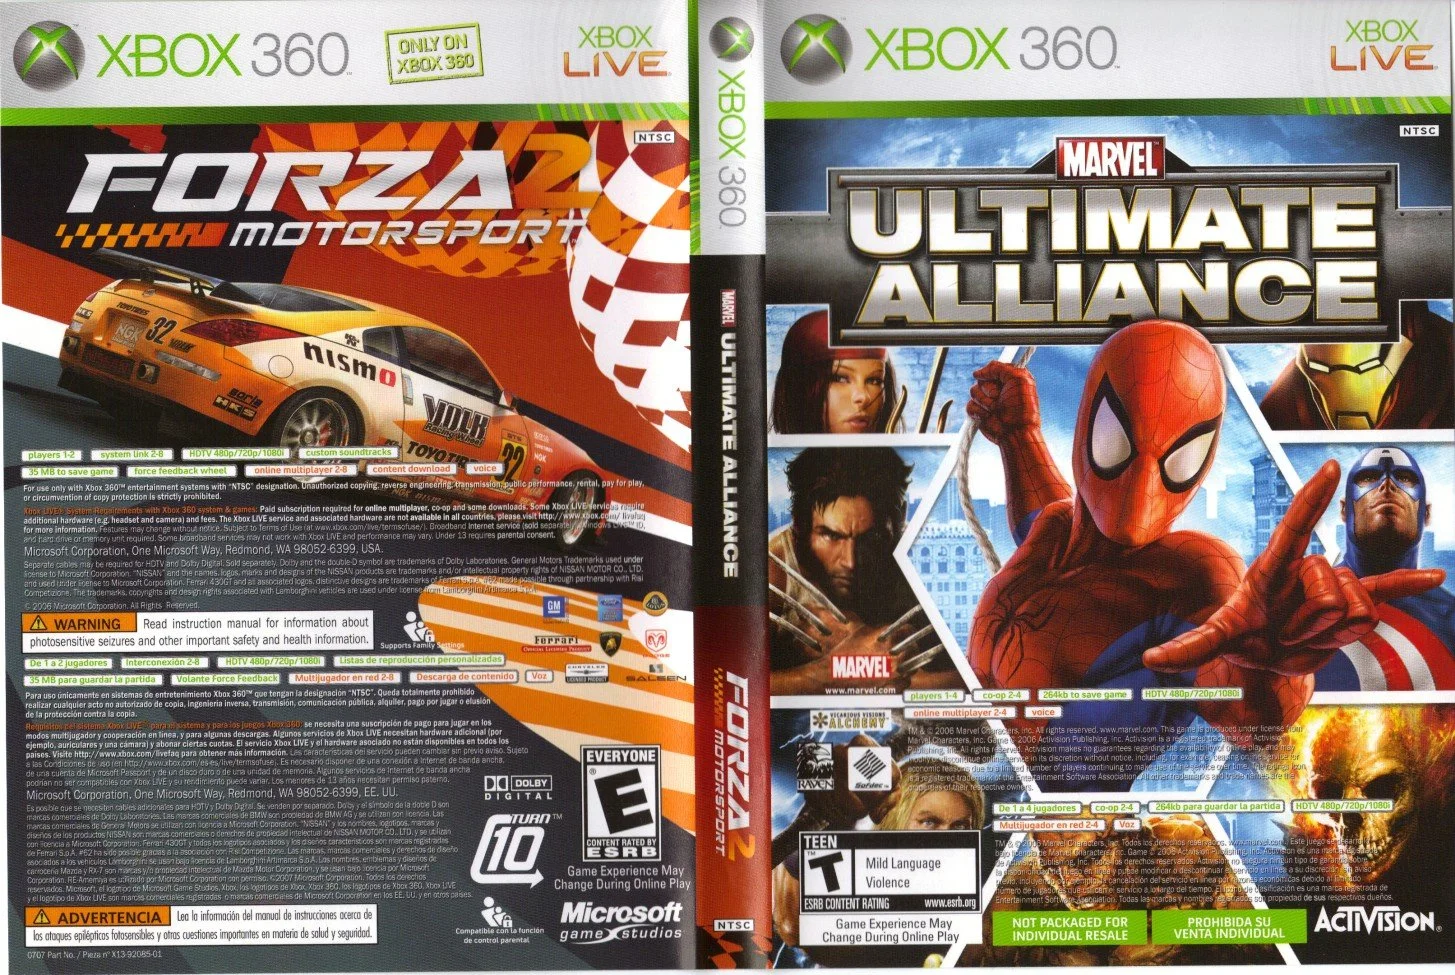 Marvel Ultimate Alliance / Forza 2 Combo Pack